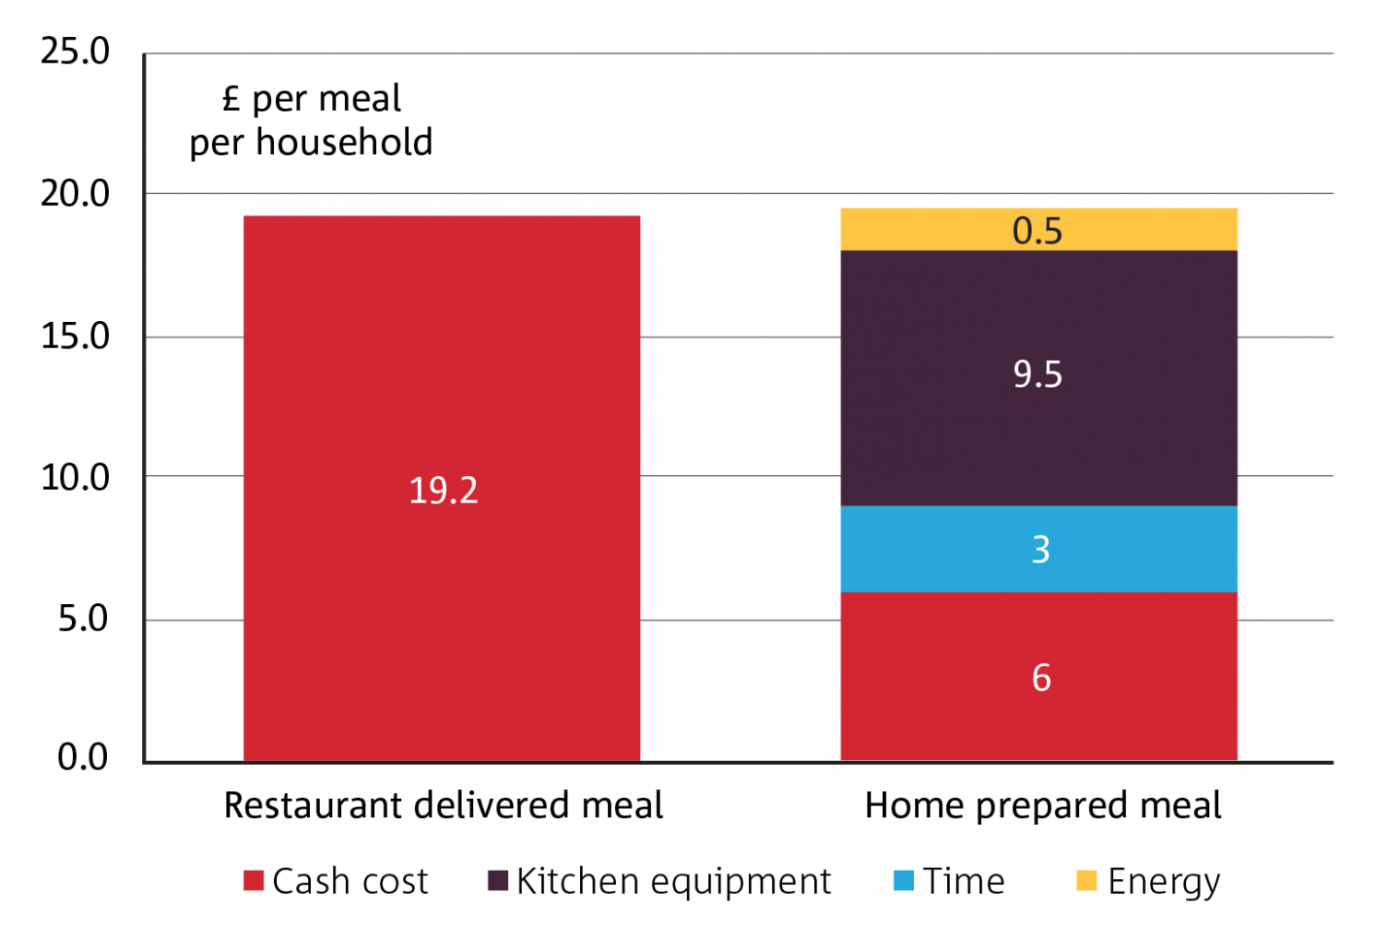 Cost of a delivered meal